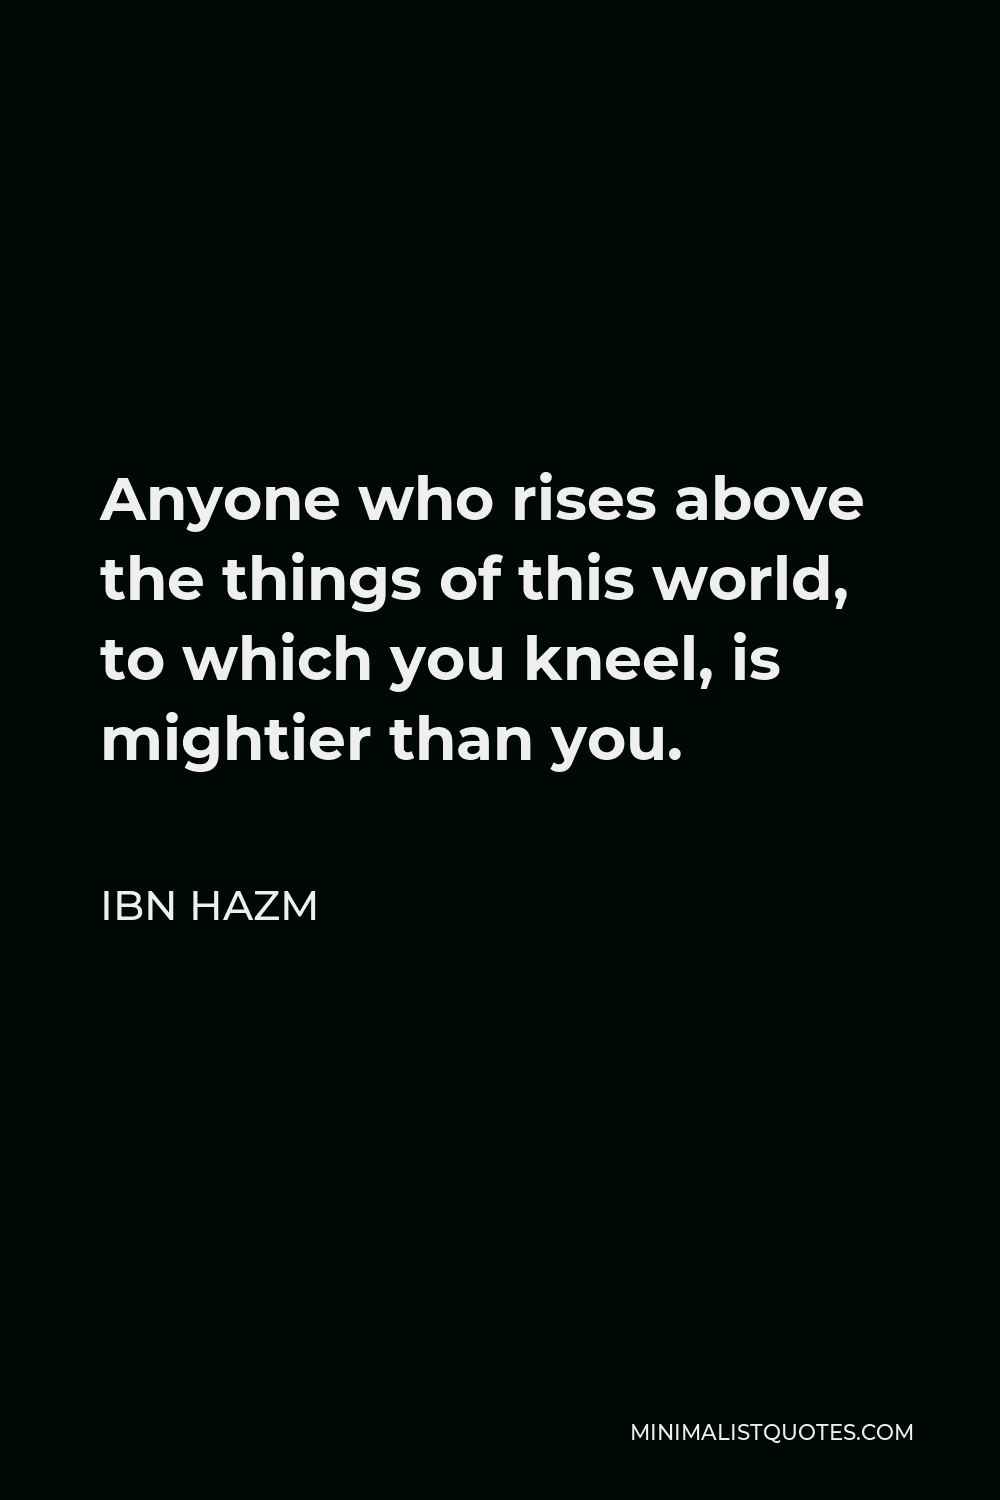 Ibn Hazm Quote: Anyone who rises above the things of this world, to ...